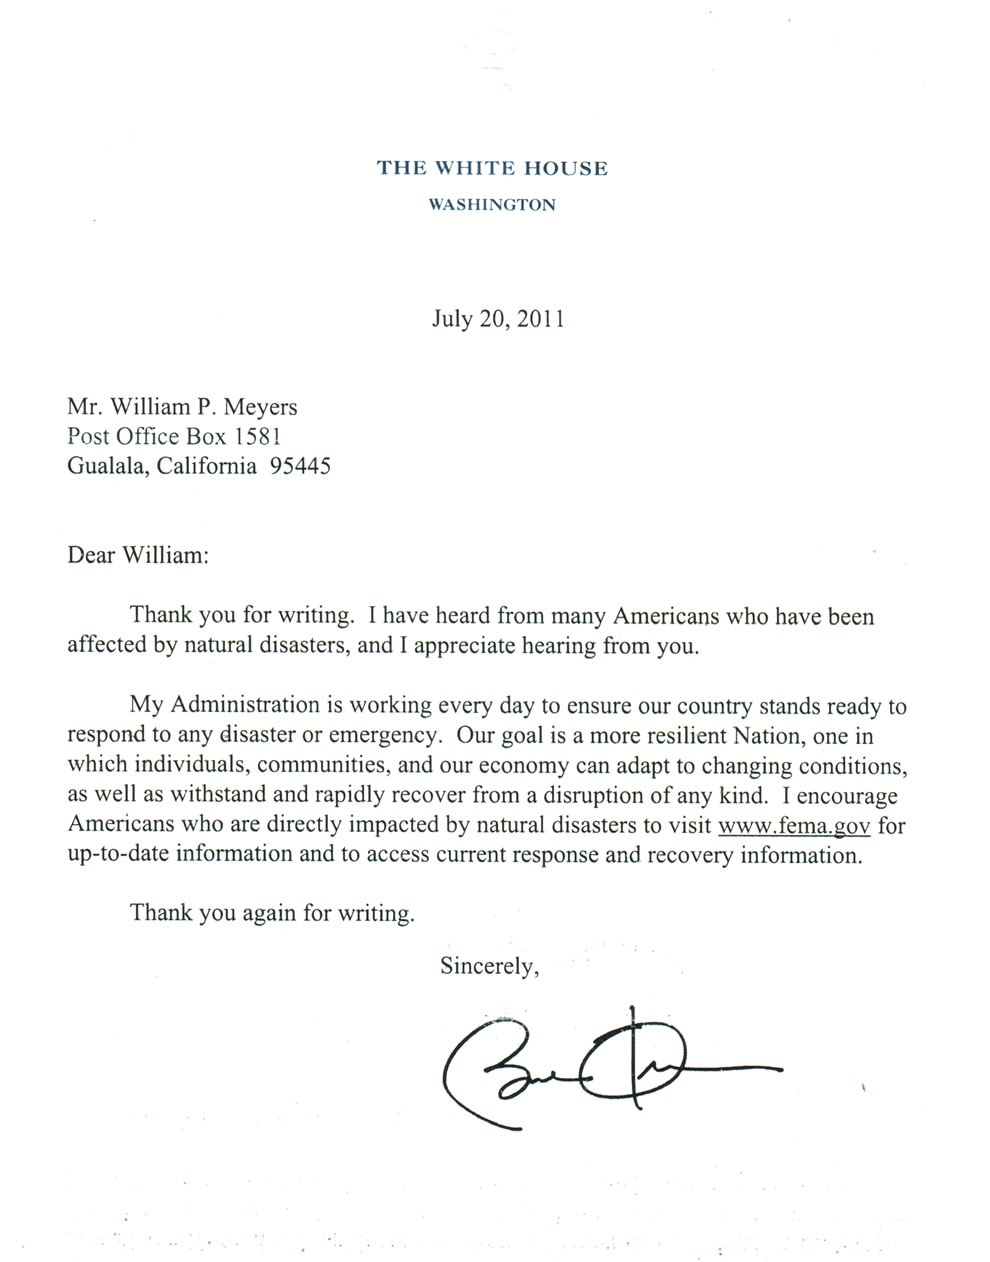 Barack Obama letter to William Meyers on nuclear energy